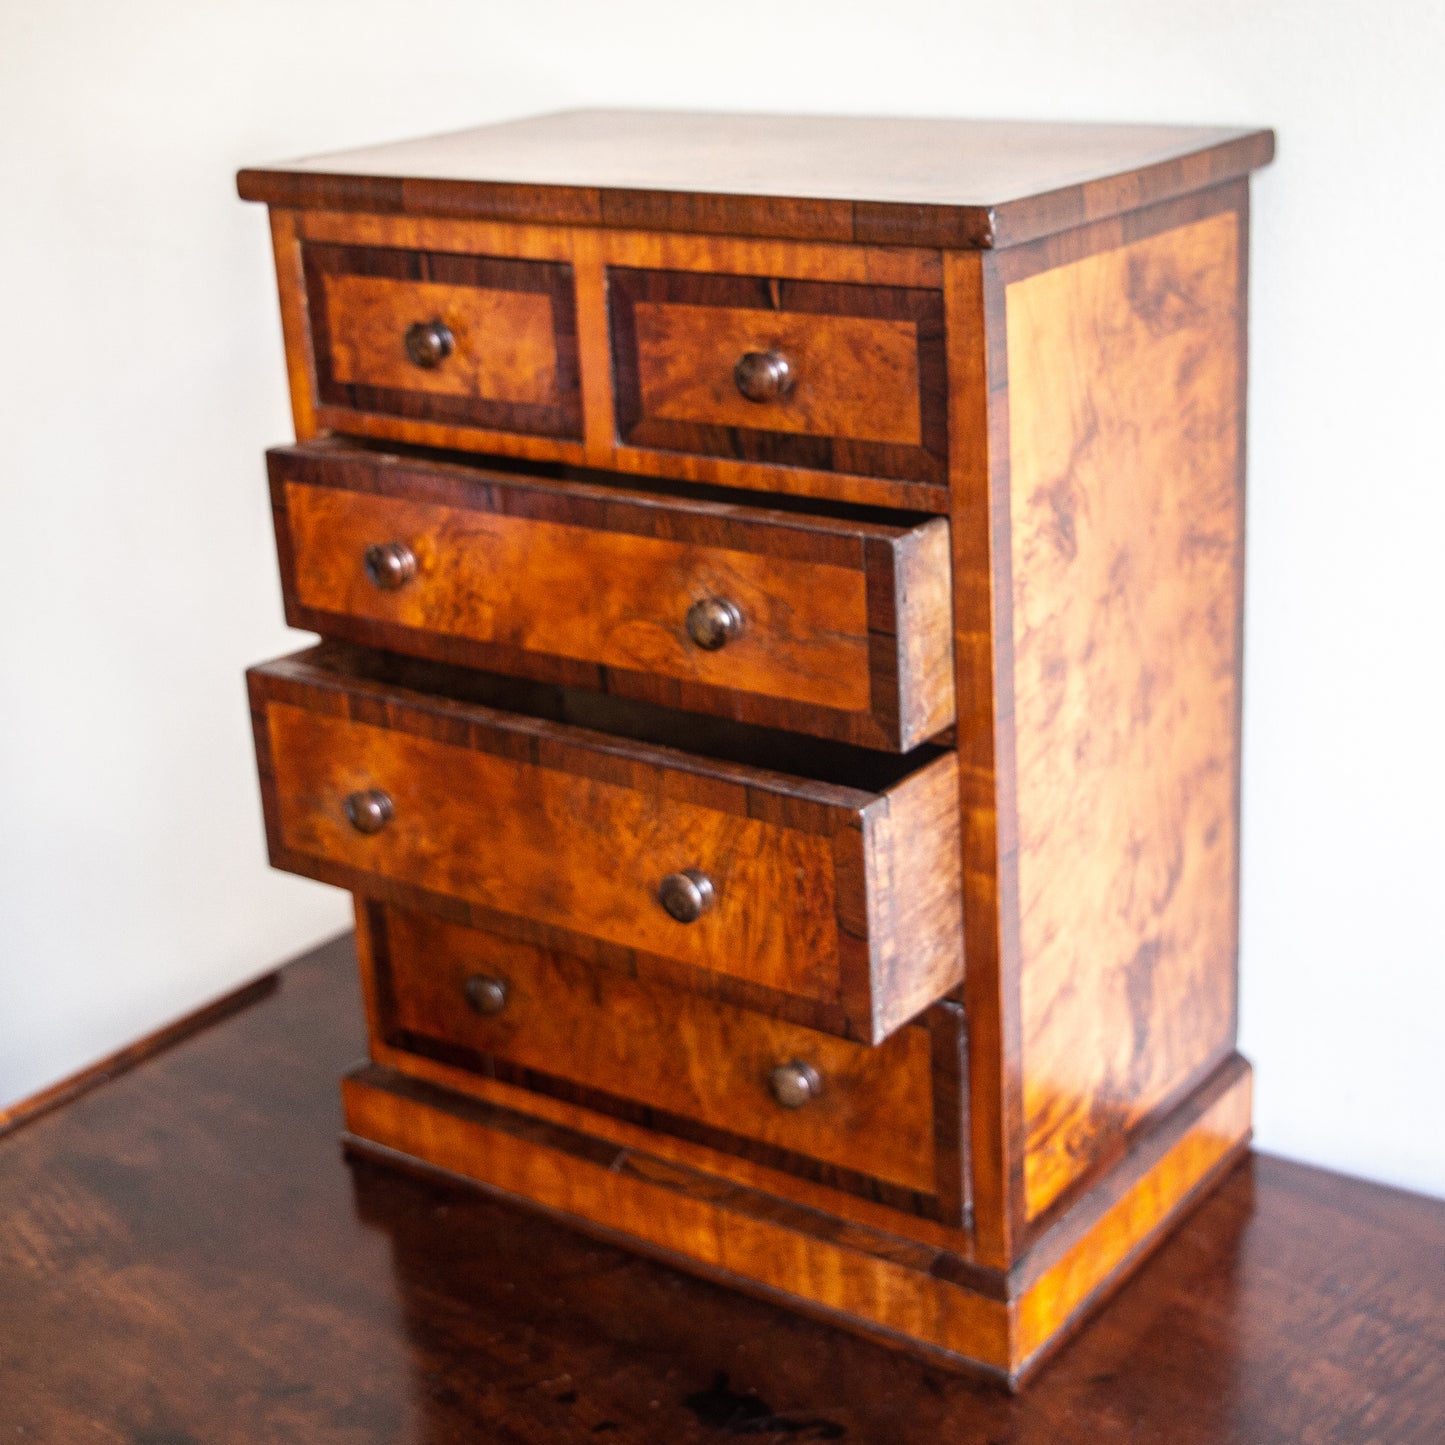 MINIATURE CHEST OF DRAWERS